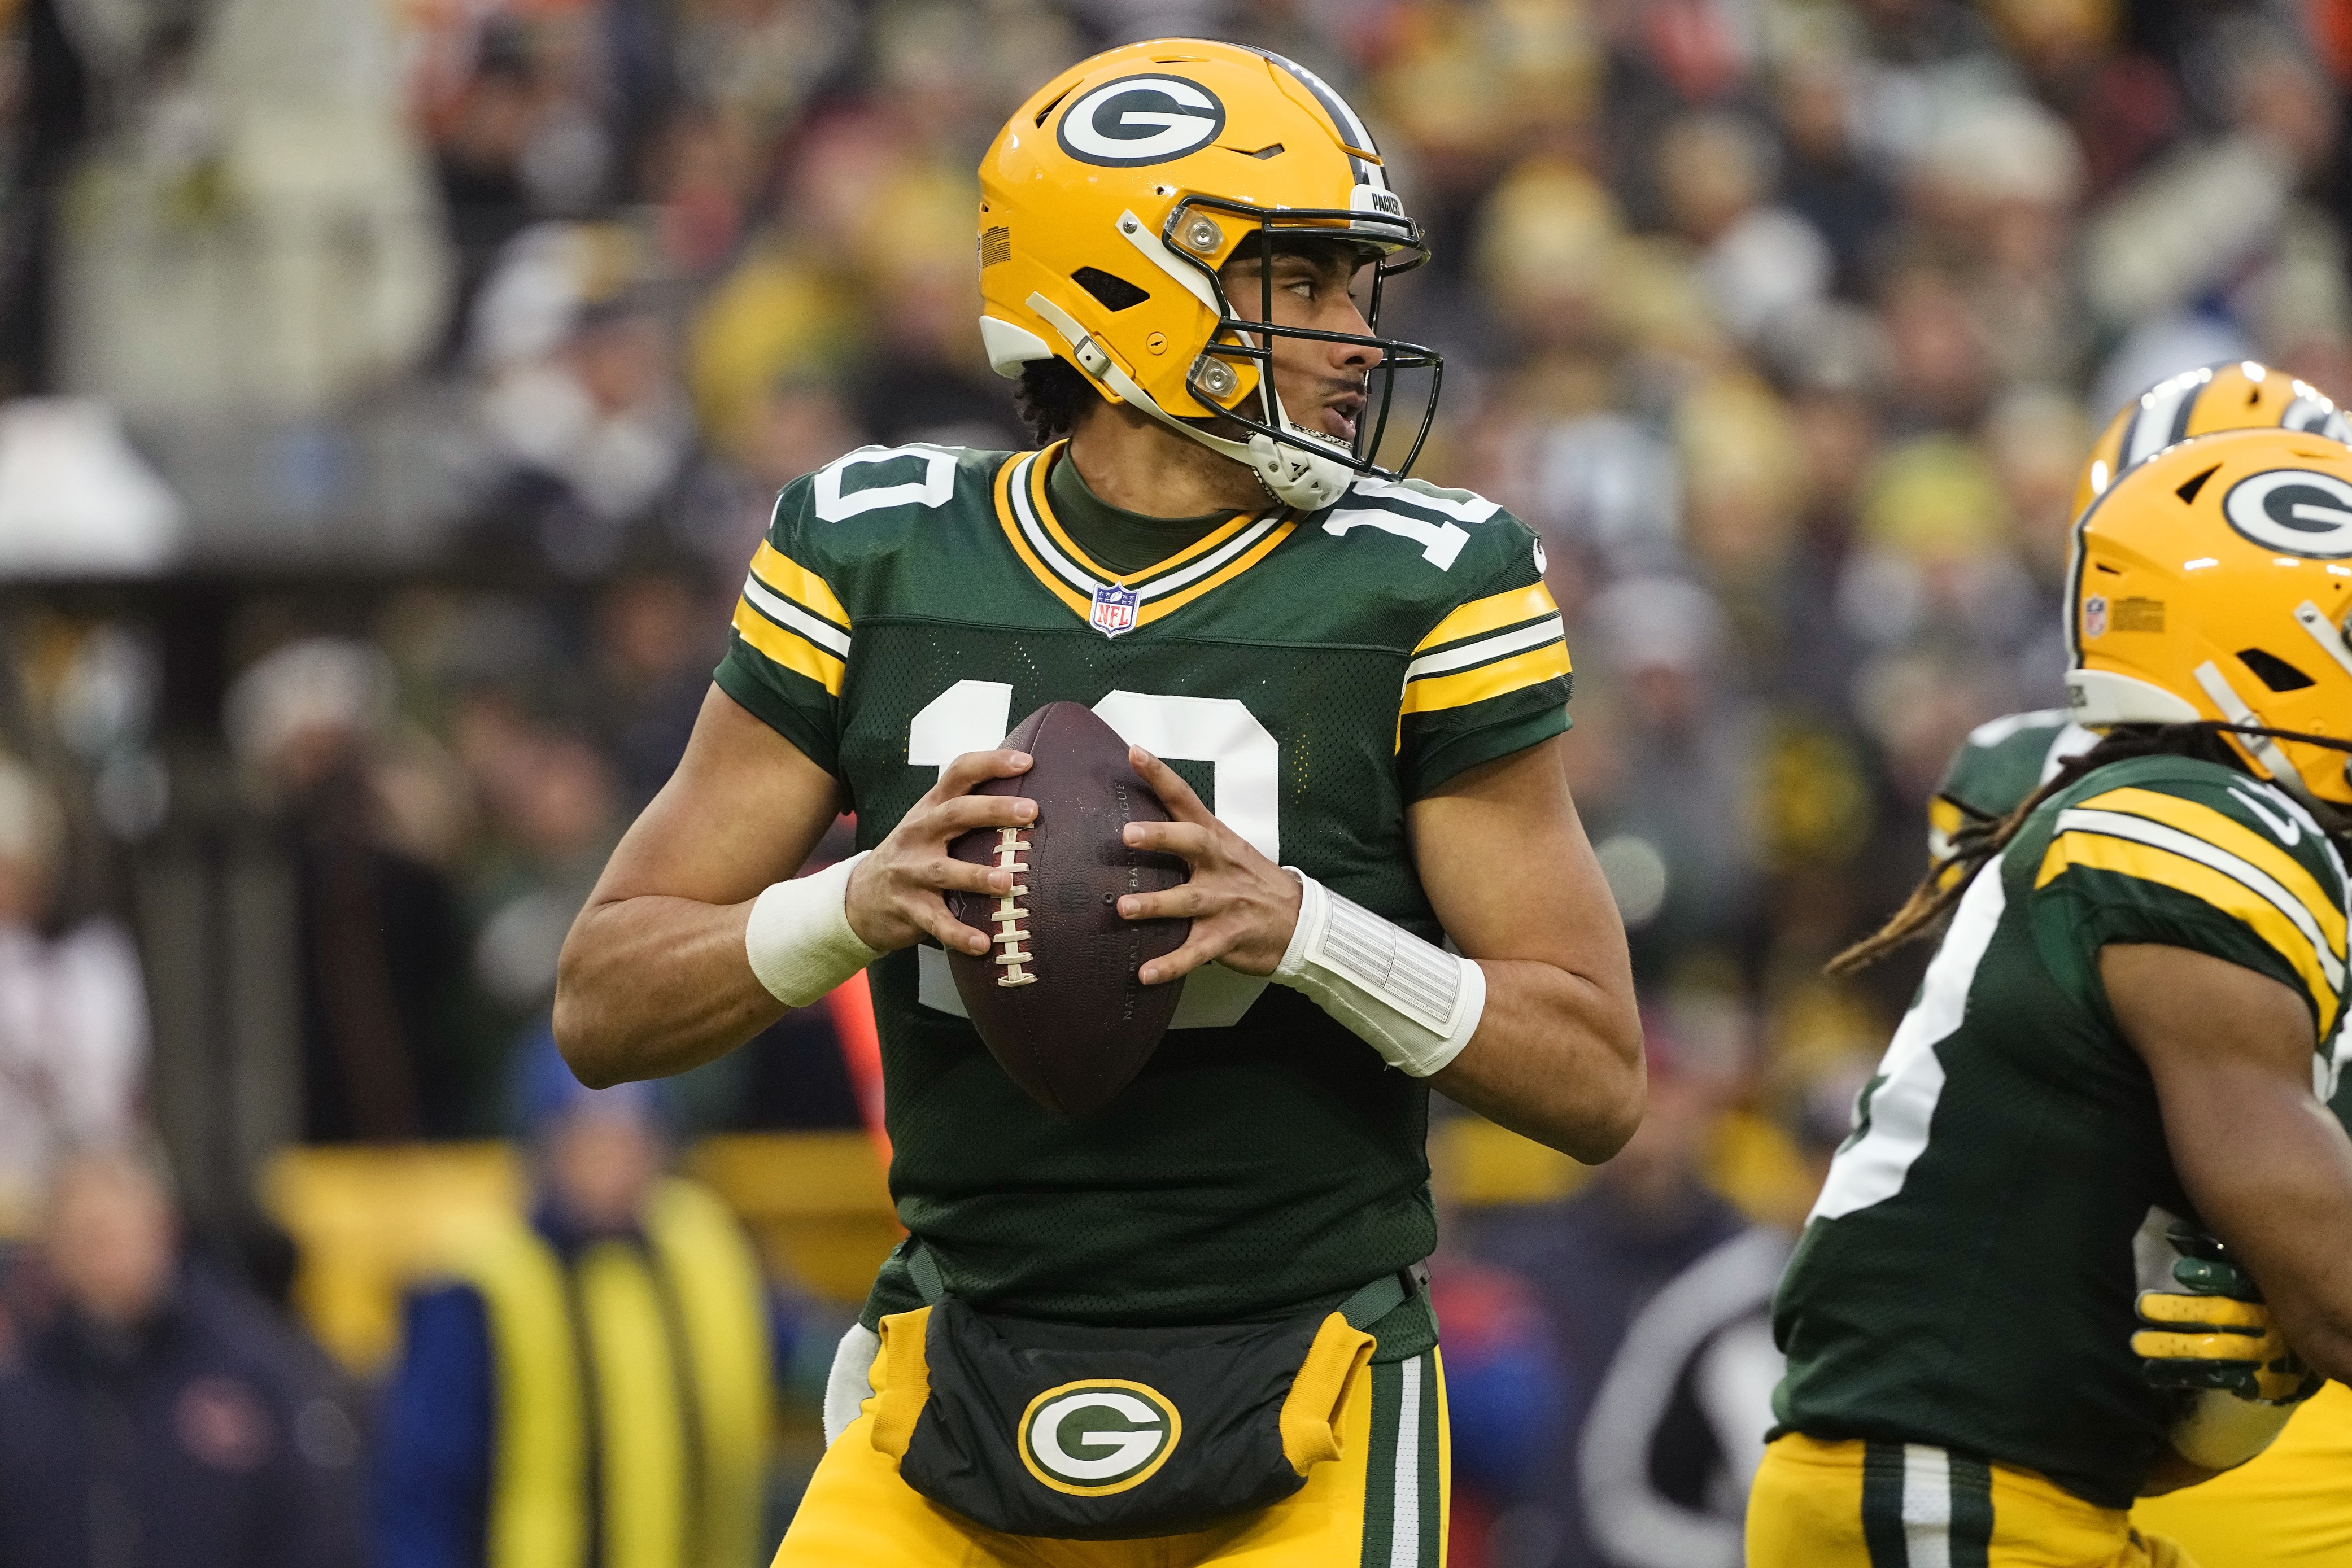 Packers quarterback Jordan Love completed 27 of 32 passes for 316 yards and two touchdowns to lead Green Bay past Chicago and into the NFC playoffs.